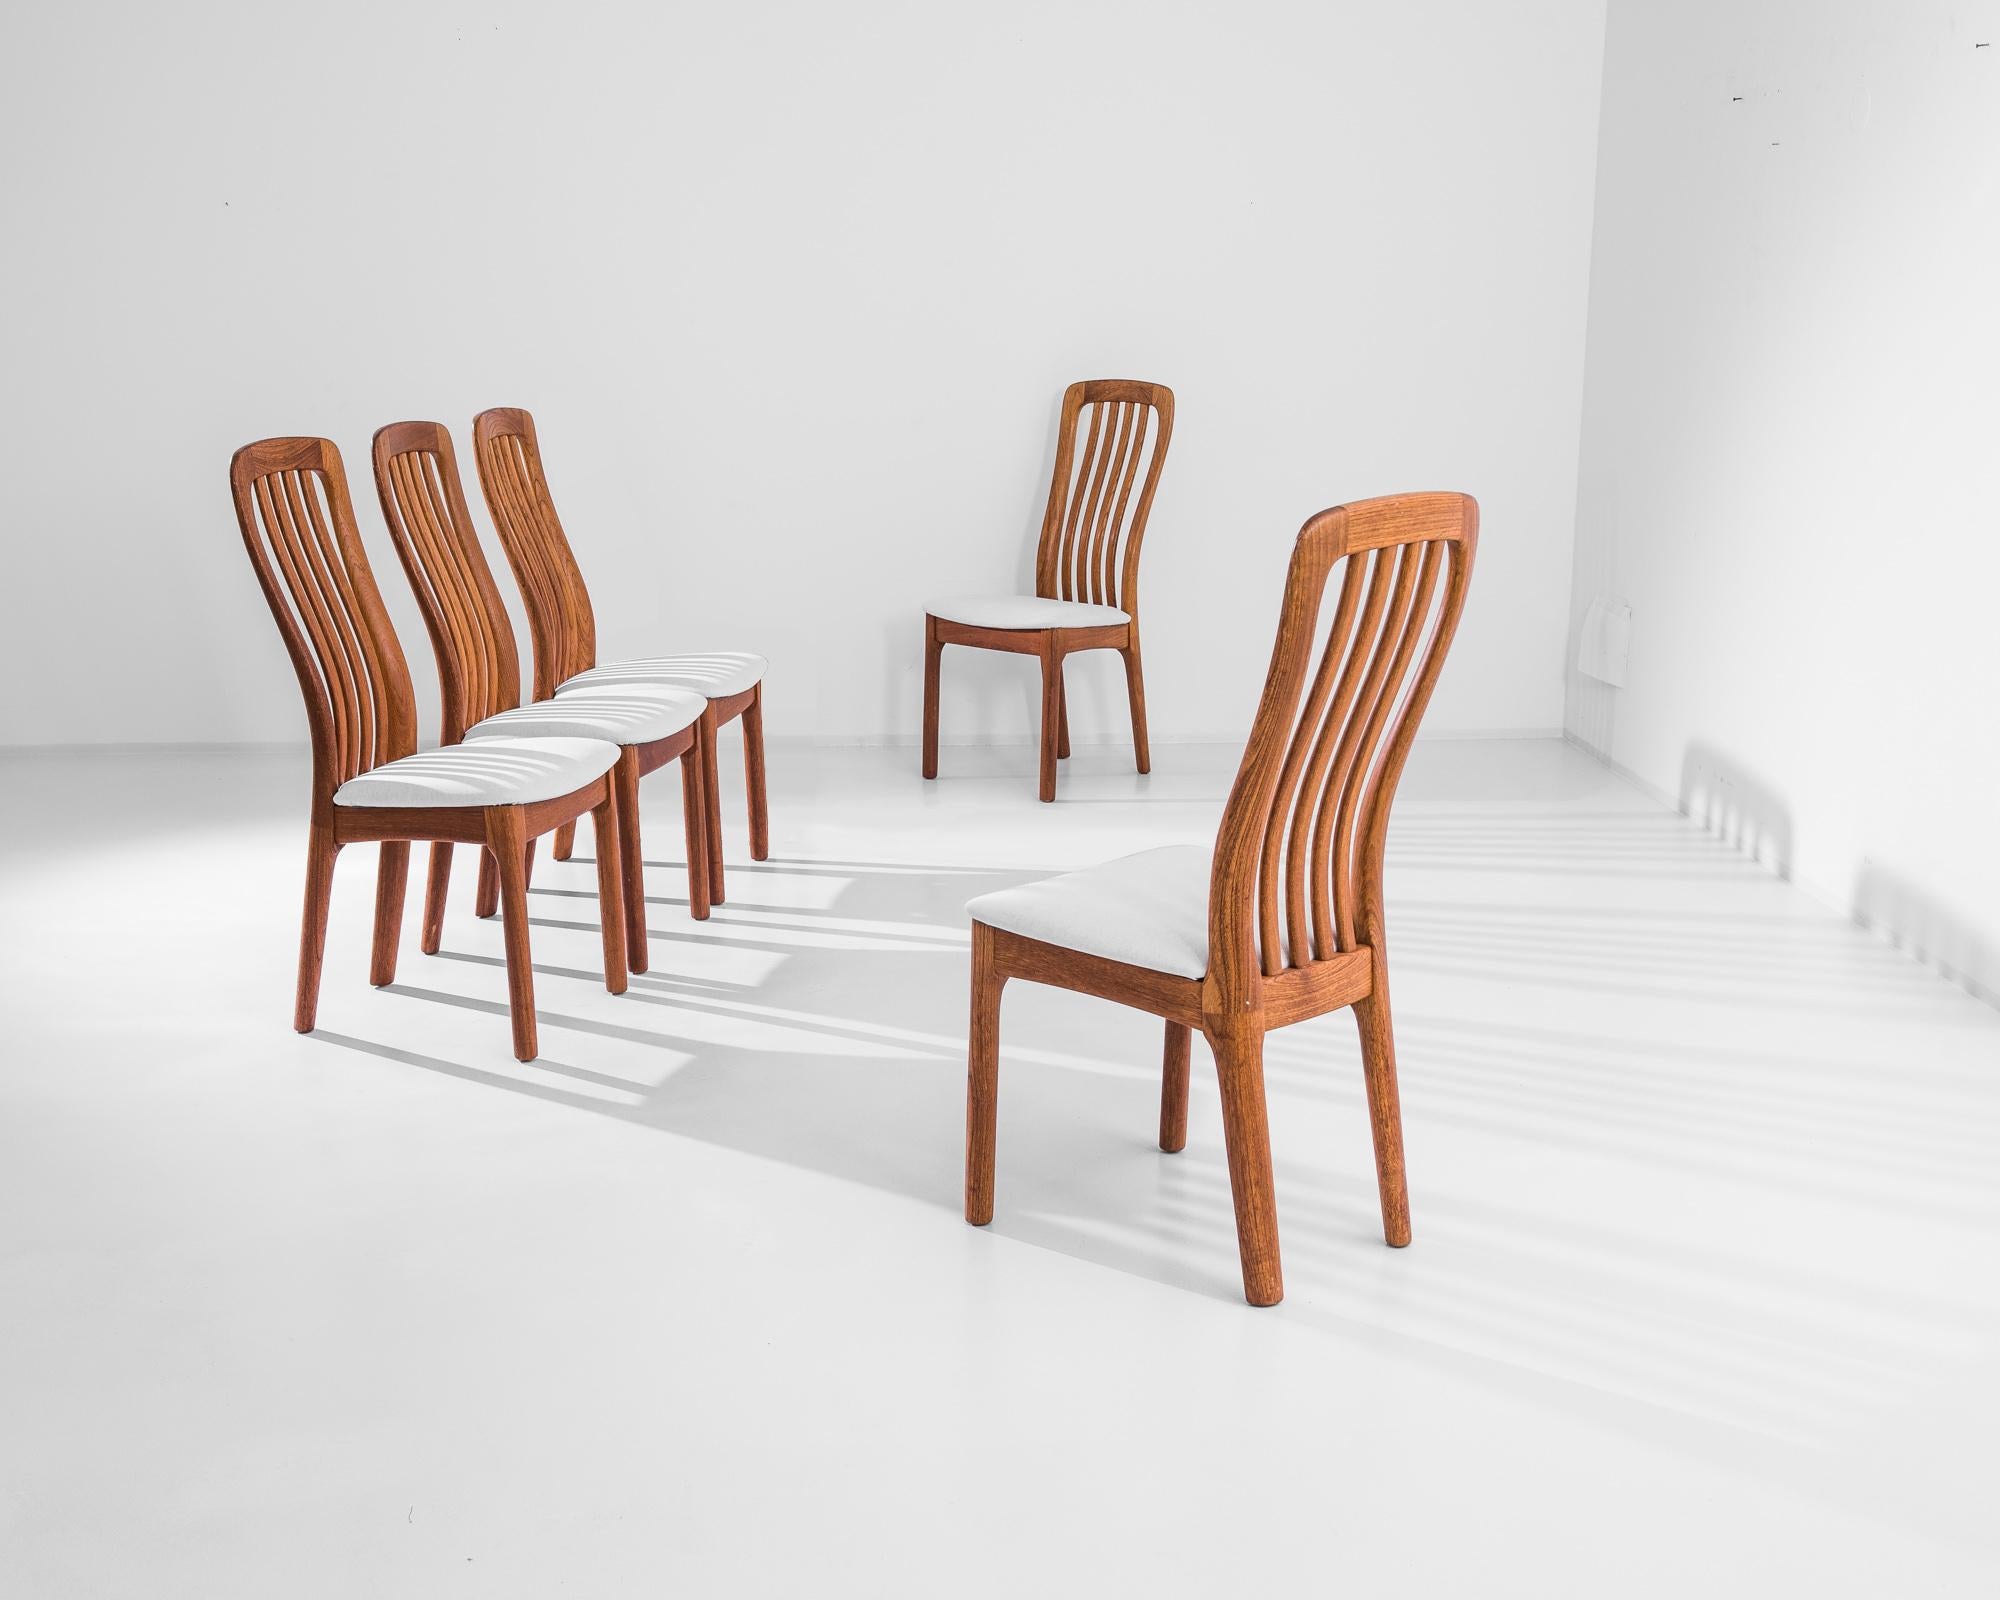 A set of five Mid-Century Modern wooden dining chairs from 1960s Denmark. The fluid ripple of the backrest gives an inherent liveliness to the silhouette, counterbalanced by the gentle taper of the back leg. Warm, caramel-colored wood frames a seat